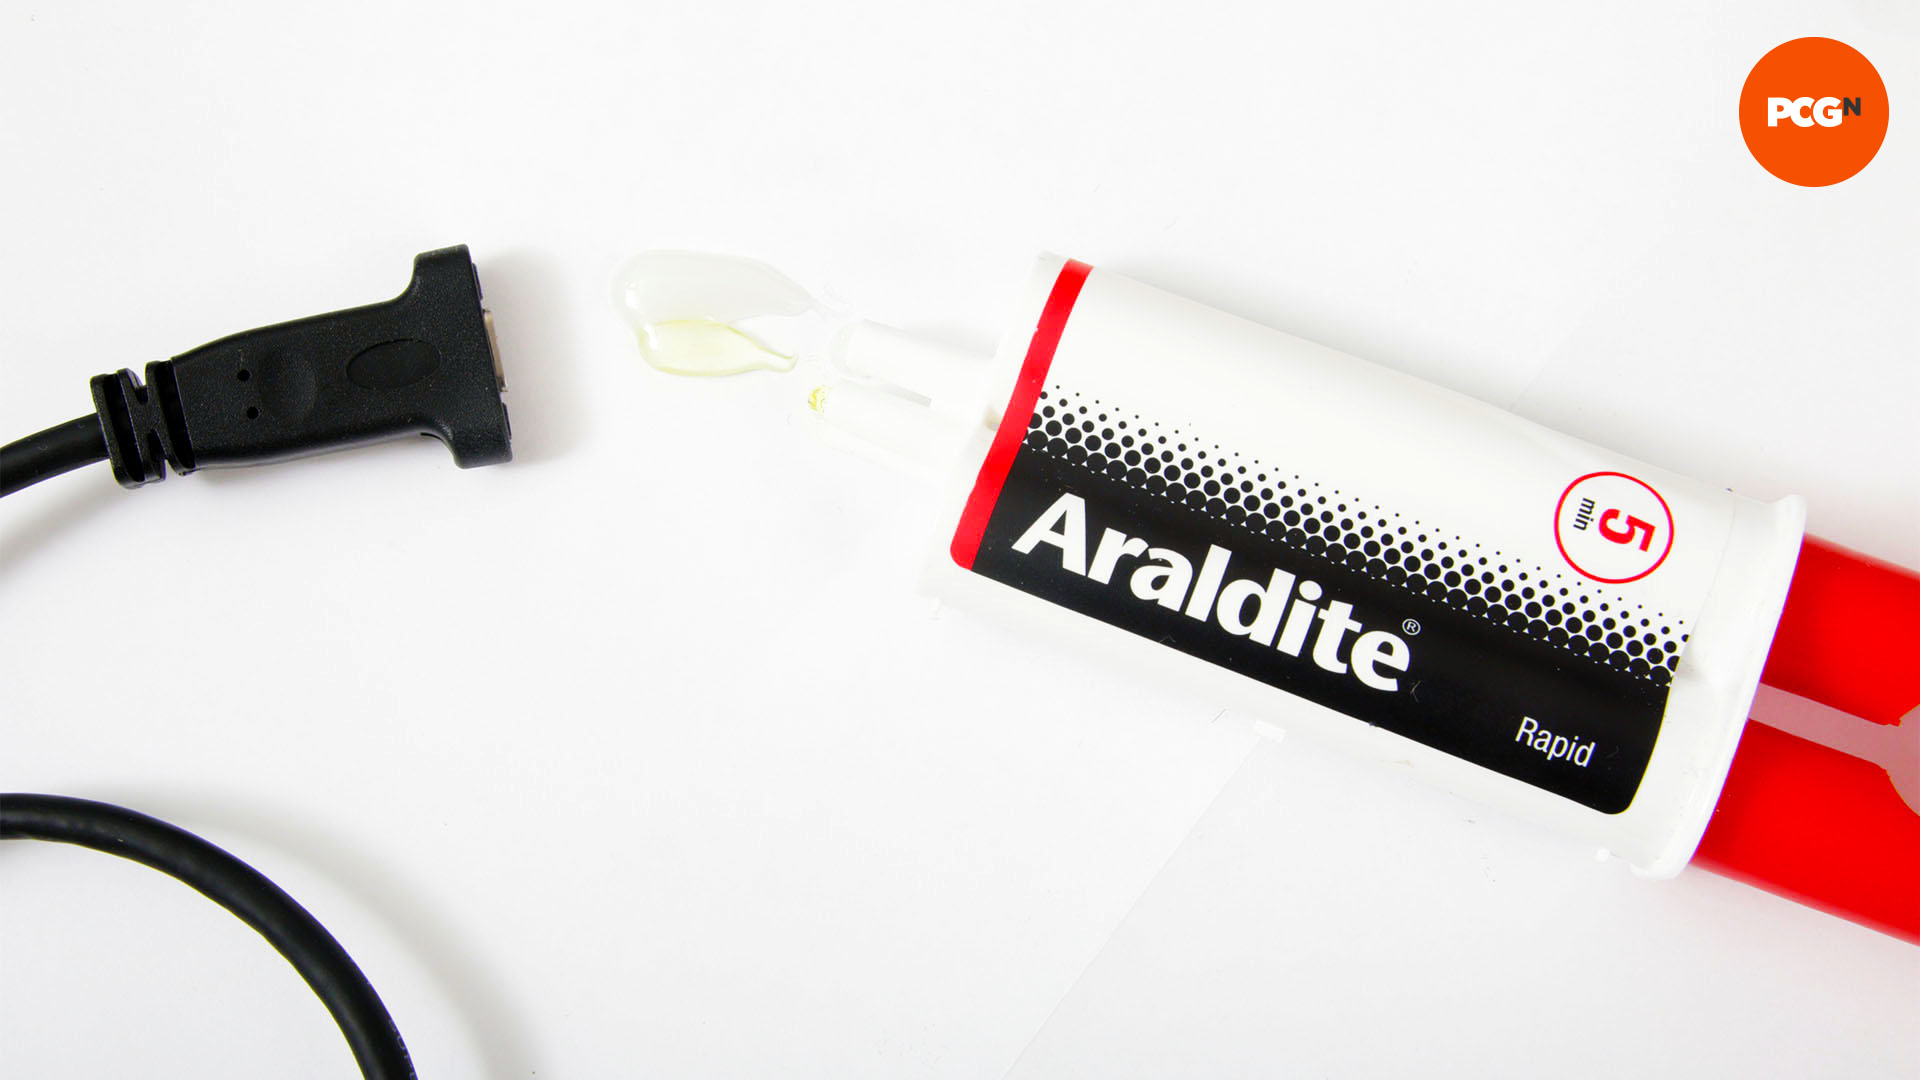 How to add USB-C to your PC case: Secure port with Araldite